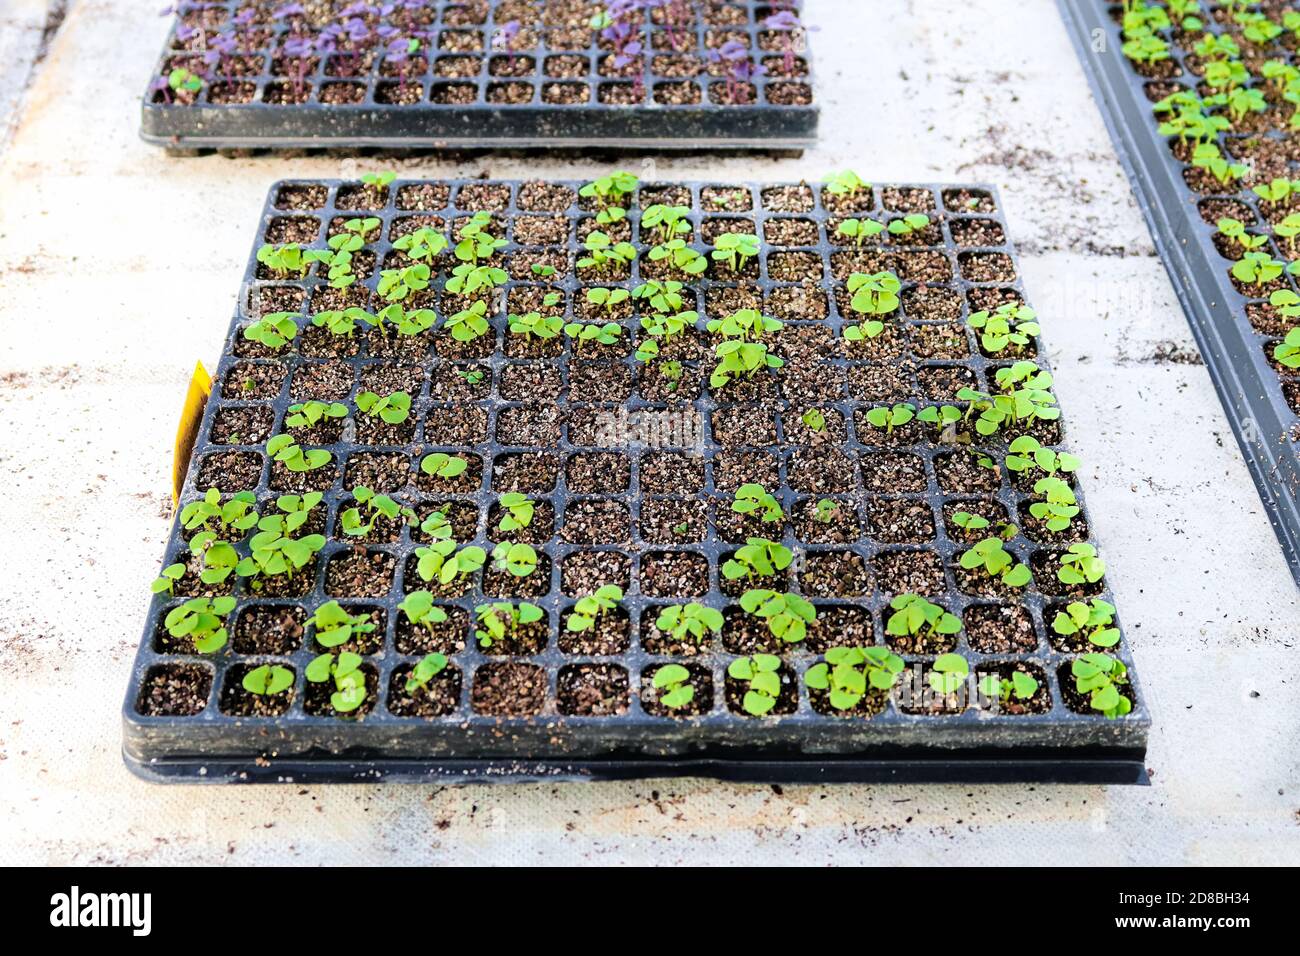 A germintation tray full of basil seedlings Stock Photo